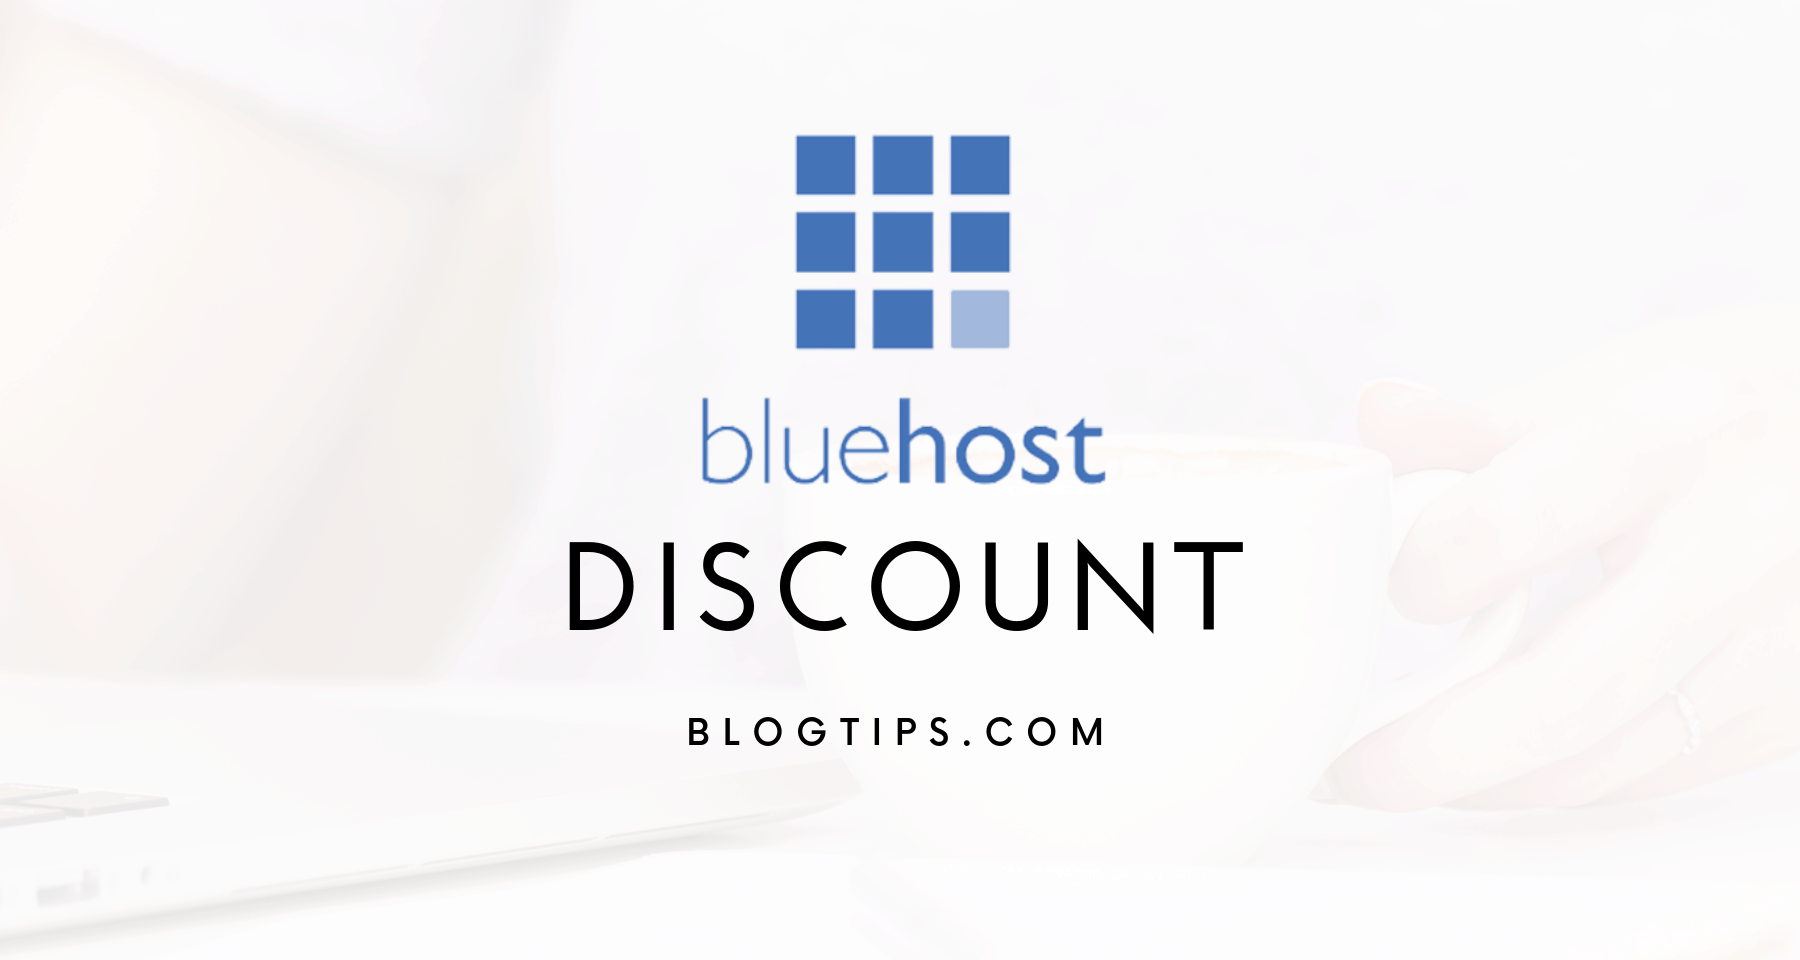 Bluhost discount Bluehost coupon start a blog for cheap domain tools blogtips.com